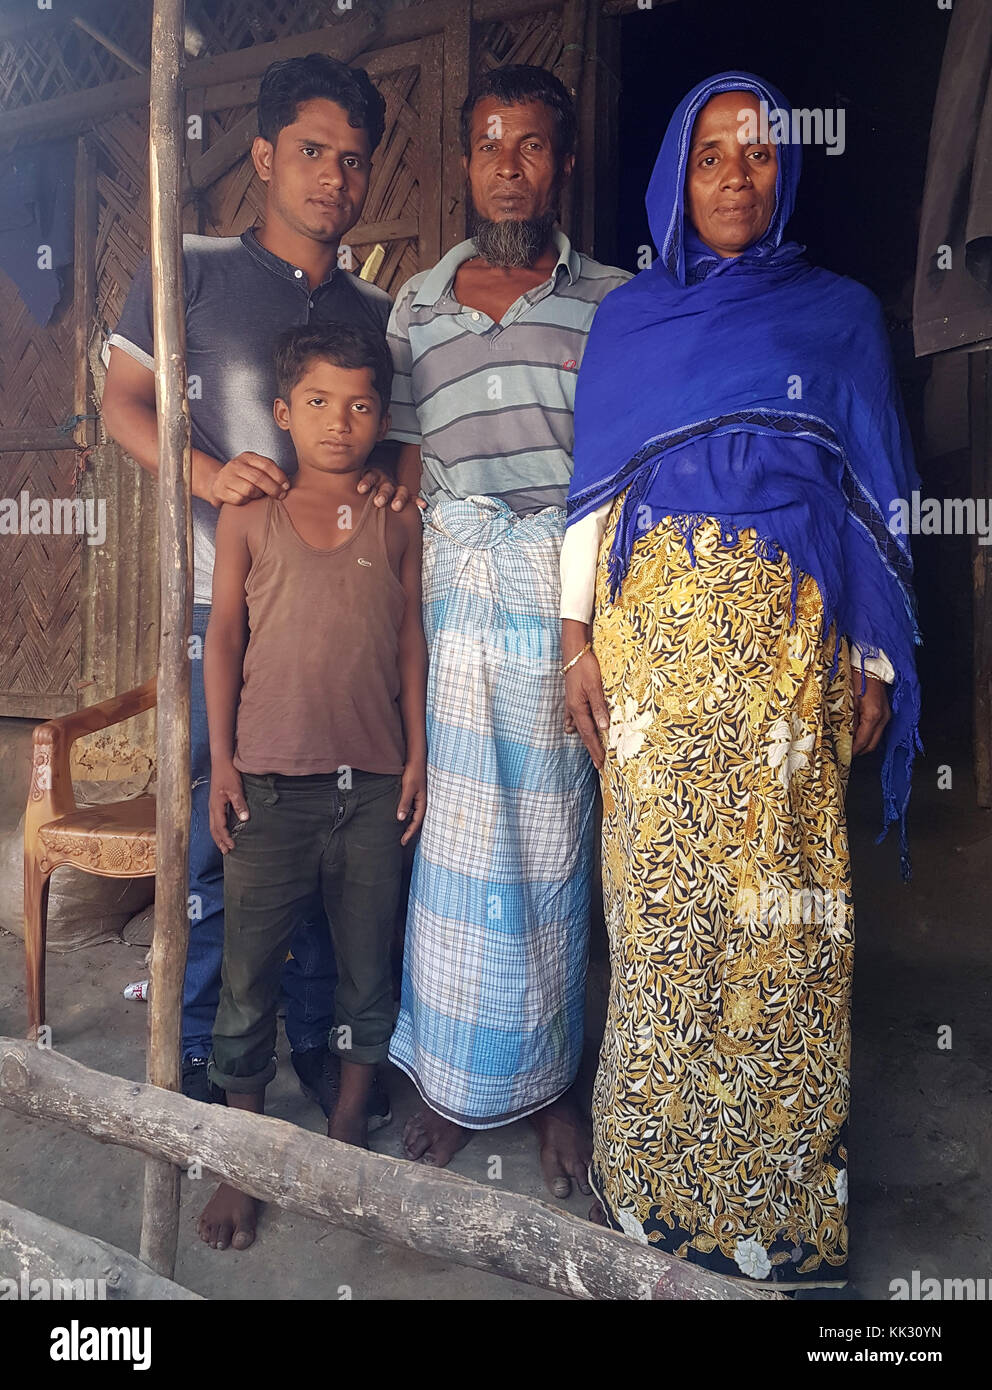 Kutupalong, Bangladesh. 28th Nov, 2017. The Hamza family stands in front of their house in the Rohingya refugee camp in Kutupalong, Bangladesh, 28 November 2017. 25-year-old Ullah Hamza (L) was one of the first children to be born in 1992 in the newly opened camp. Credit: Nick Kaiser/dpa/Alamy Live News Stock Photo